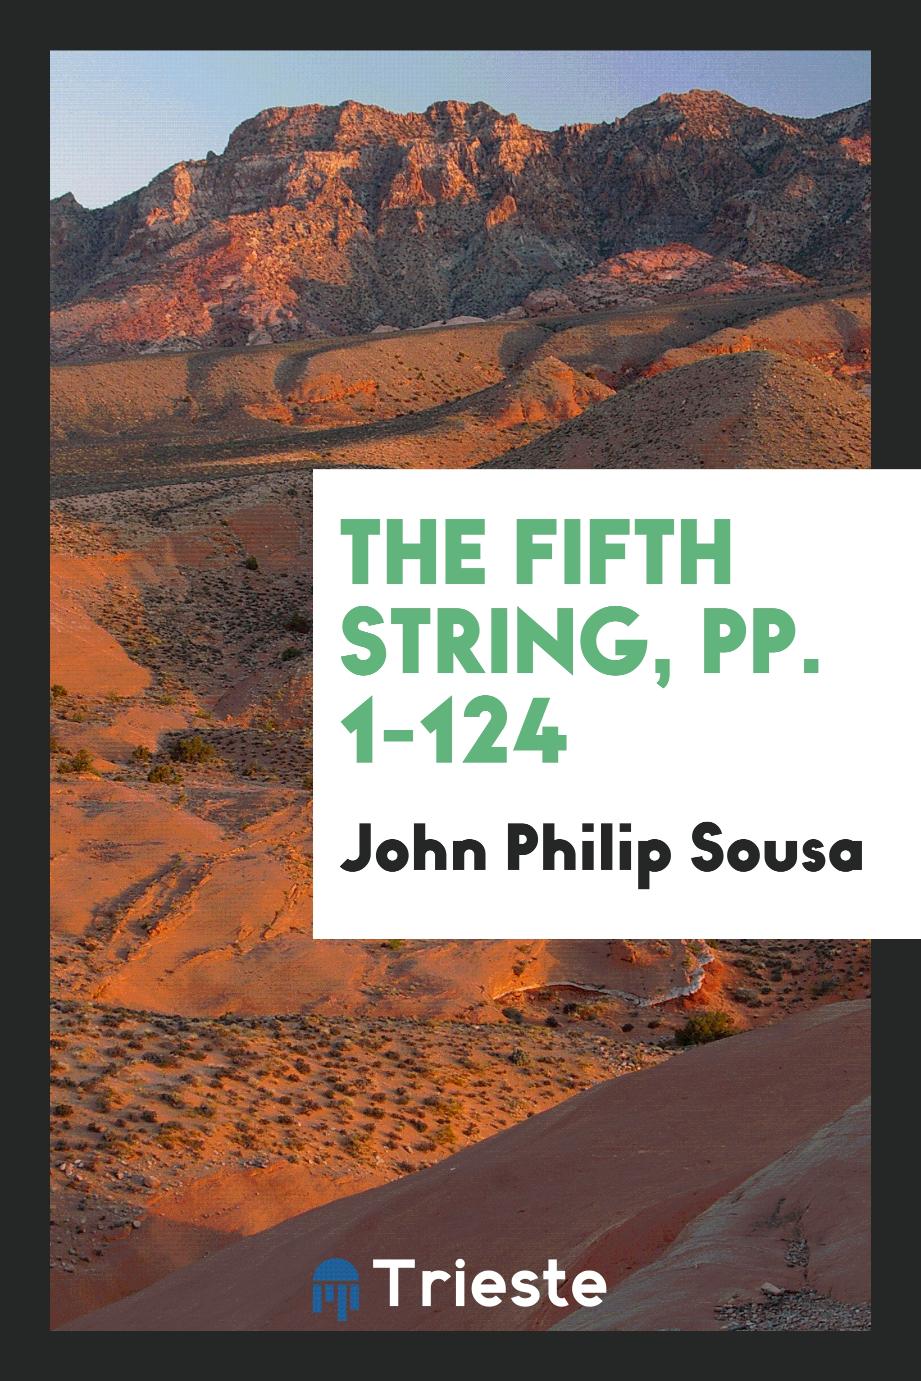 The Fifth String, pp. 1-124